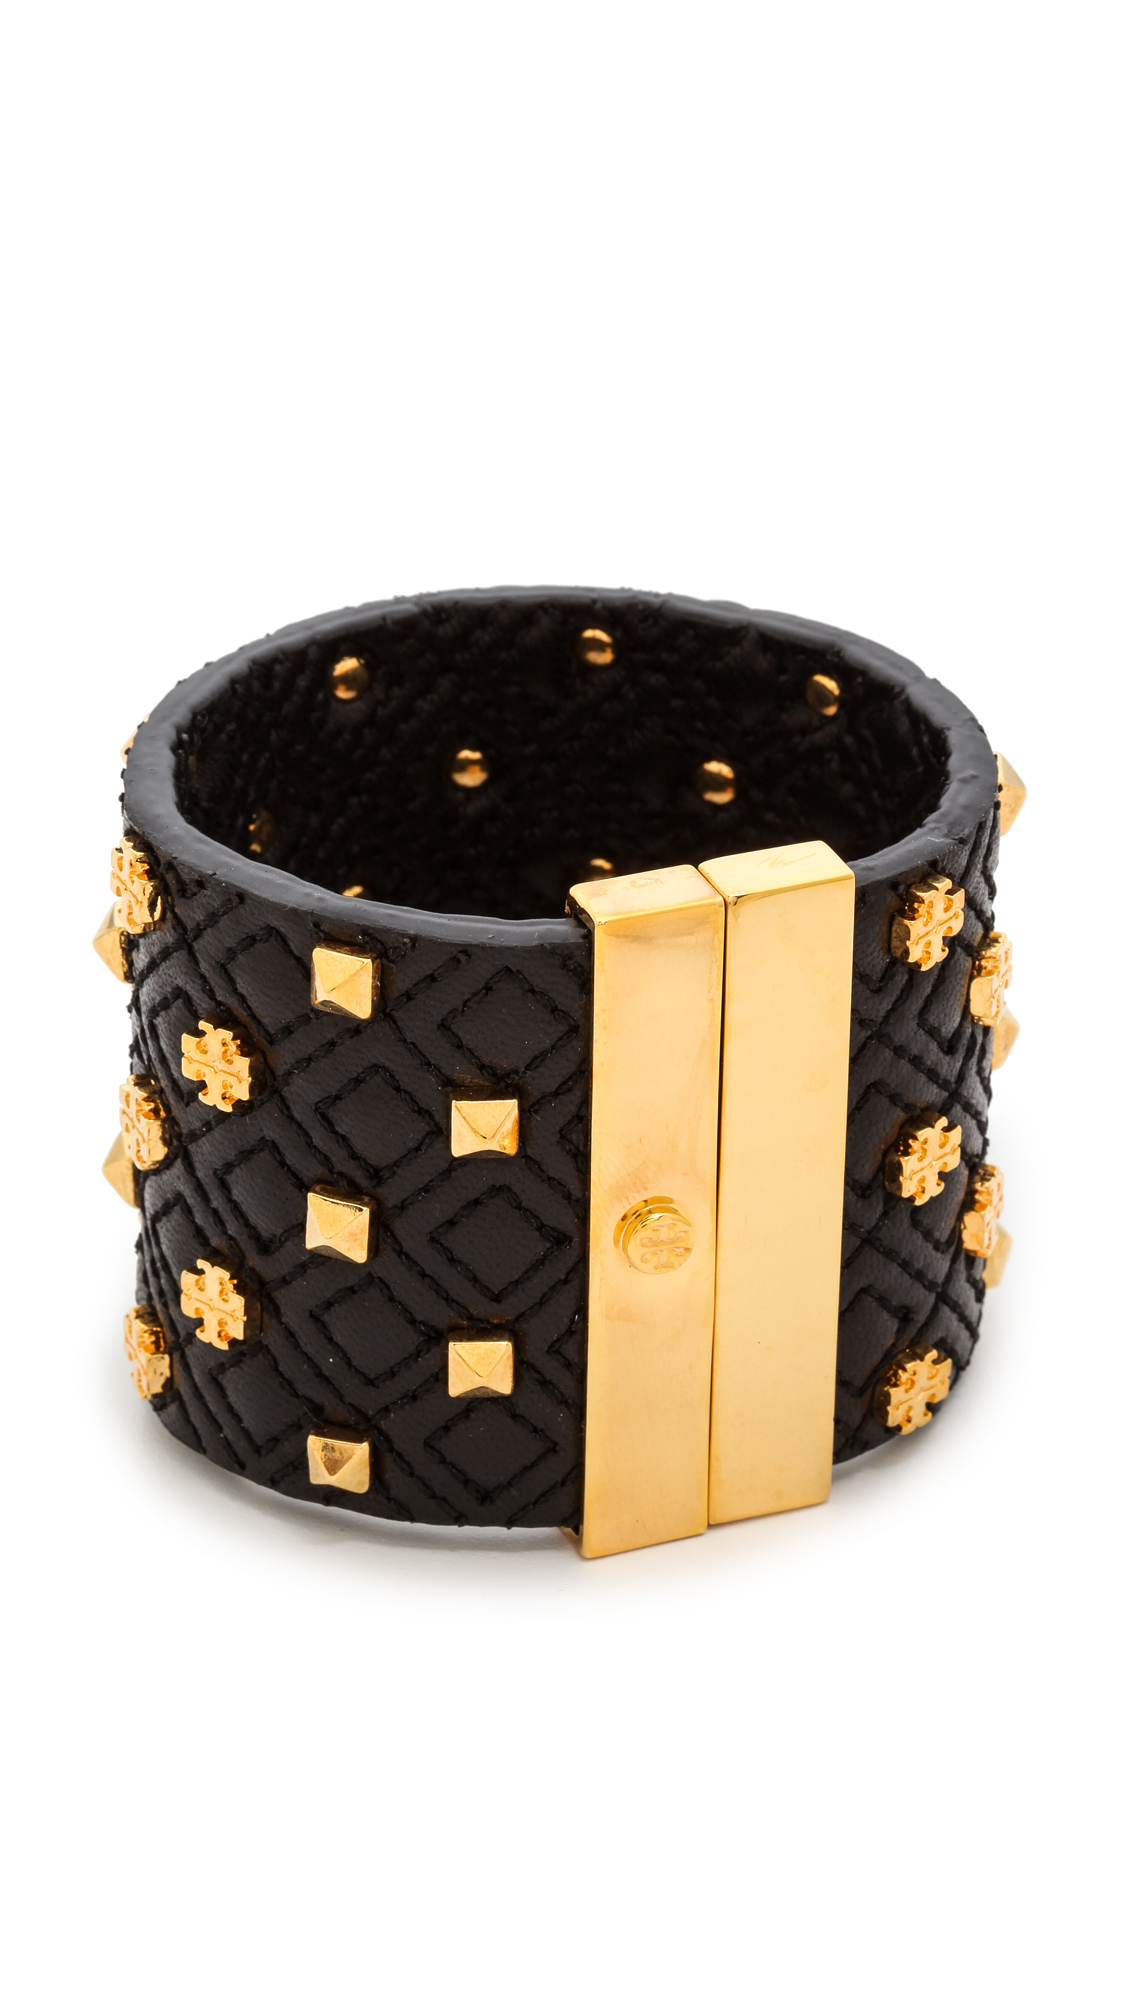 Lyst - Tory Burch Logo Quilted Leather Bracelet - Black/Shiny Brass in ...